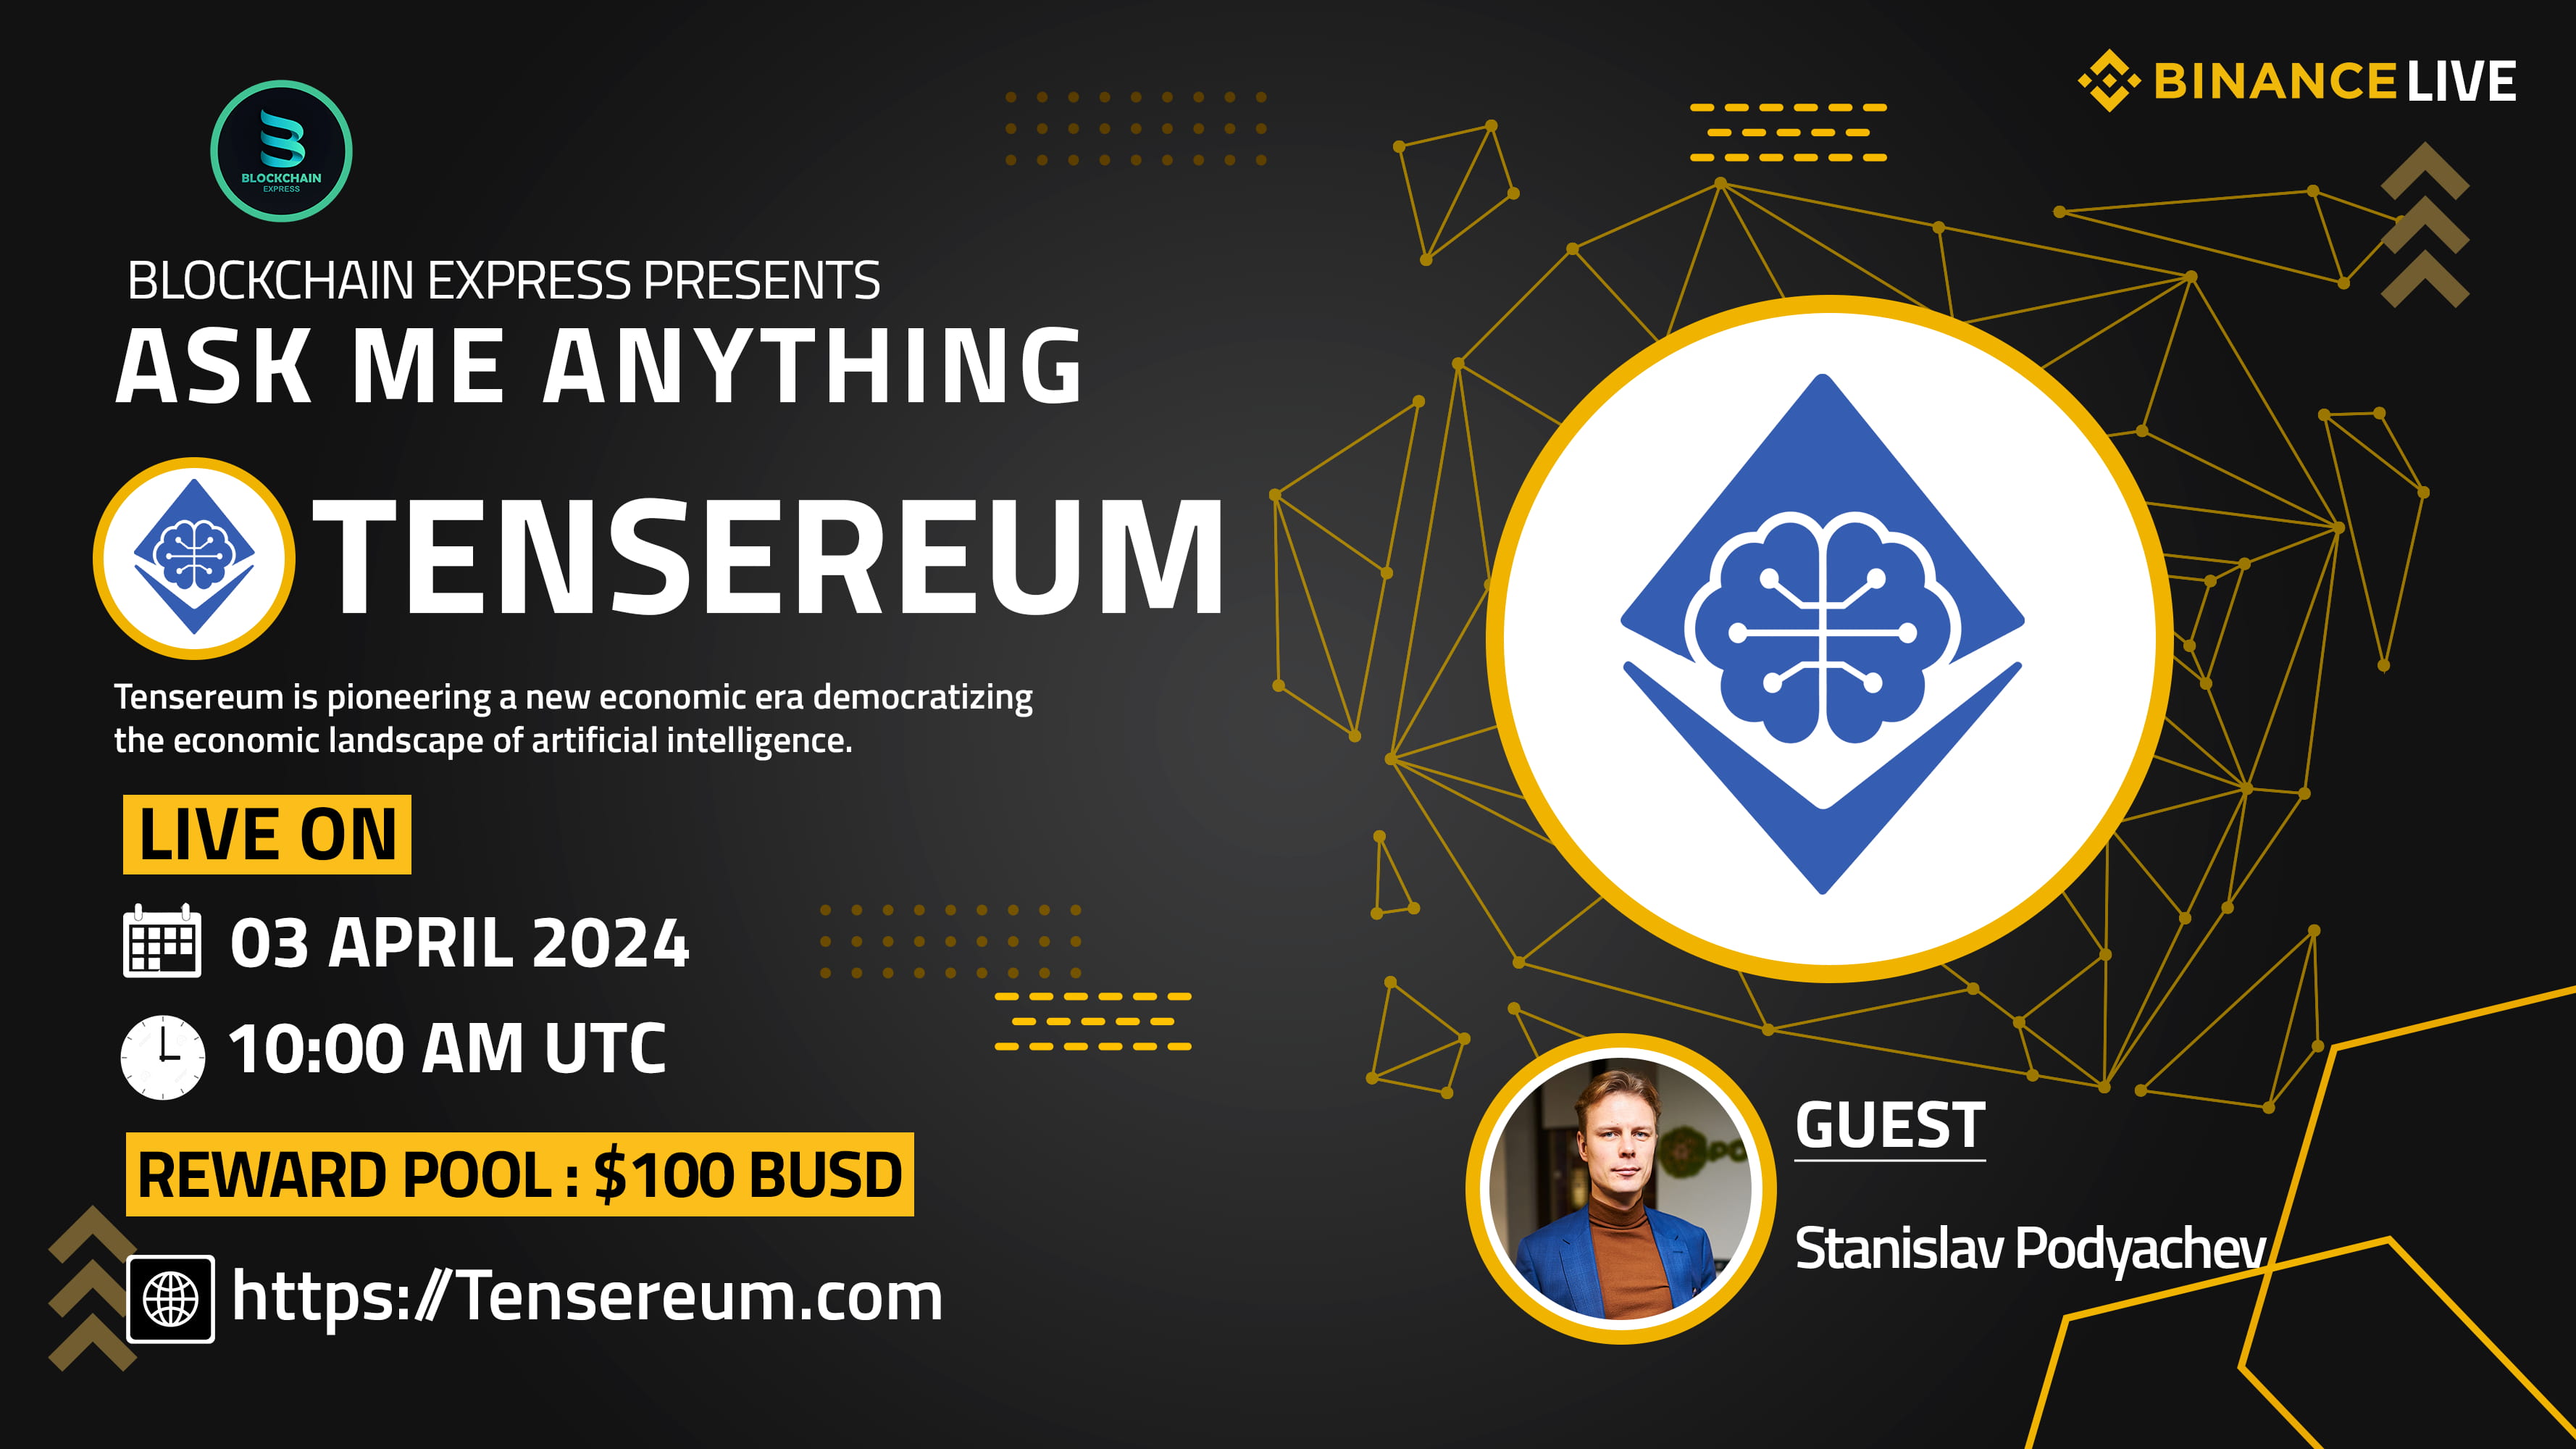 ₿lockchain Express will be hosting an AMA session with" Tensereum "